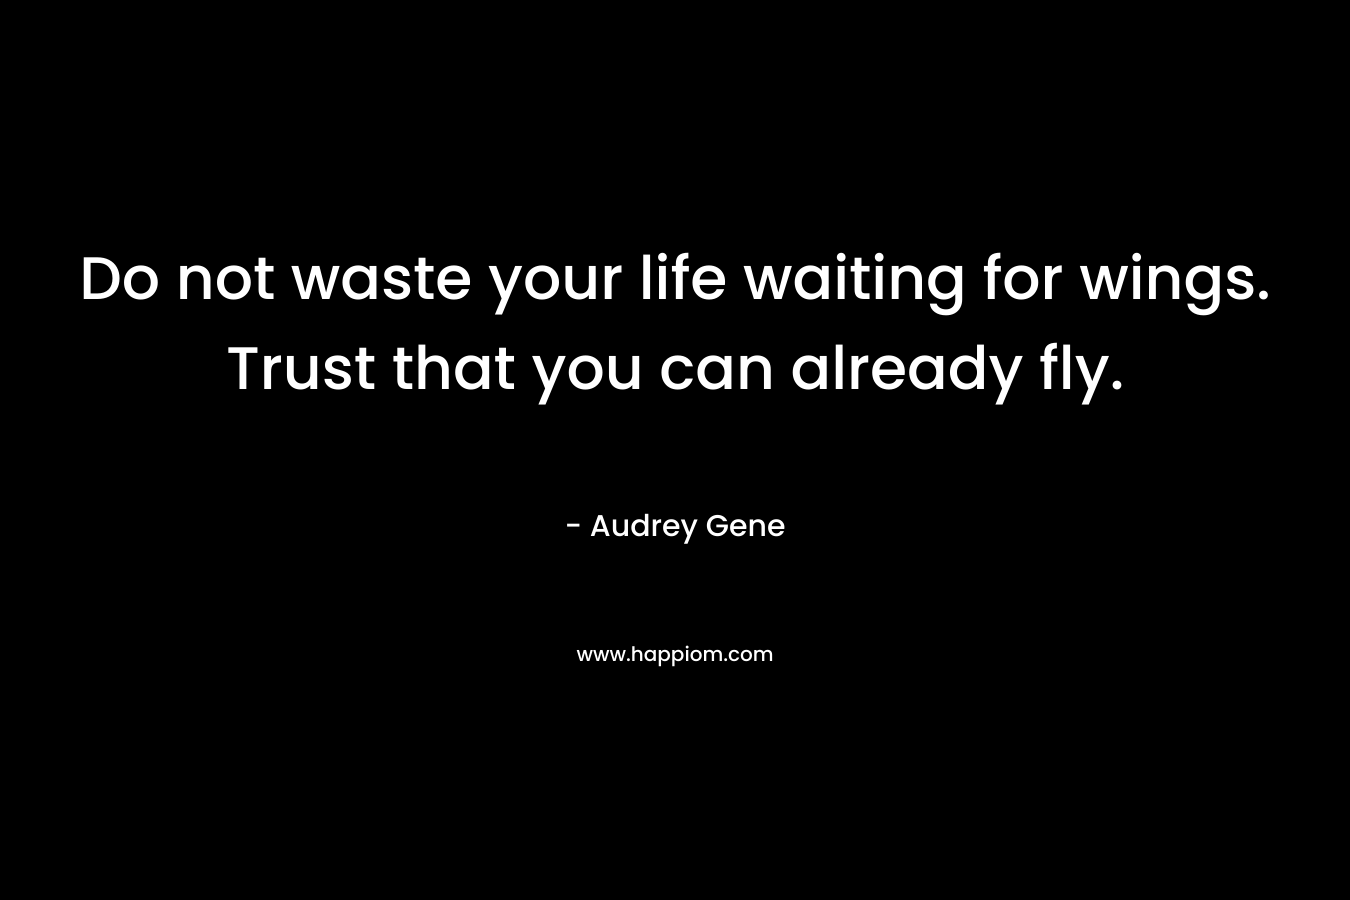 Do not waste your life waiting for wings. Trust that you can already fly.